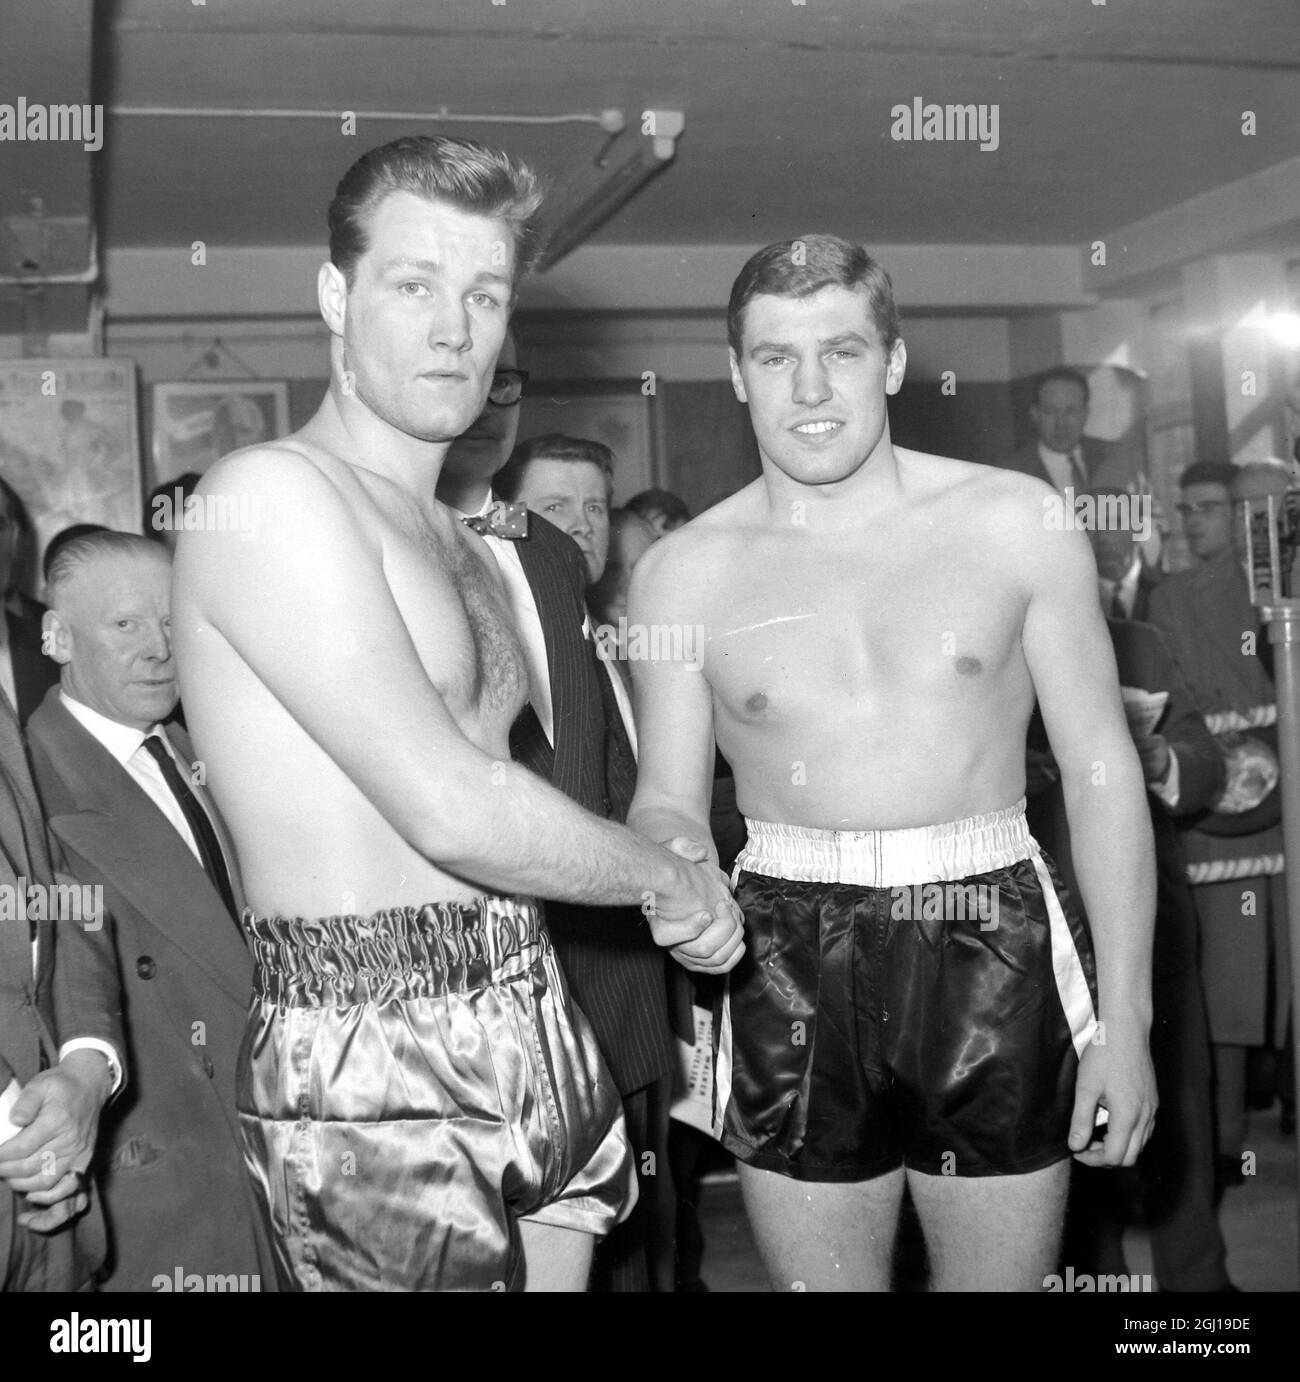 Boxing weigh in Banque d'images noir et blanc - Page 2 - Alamy